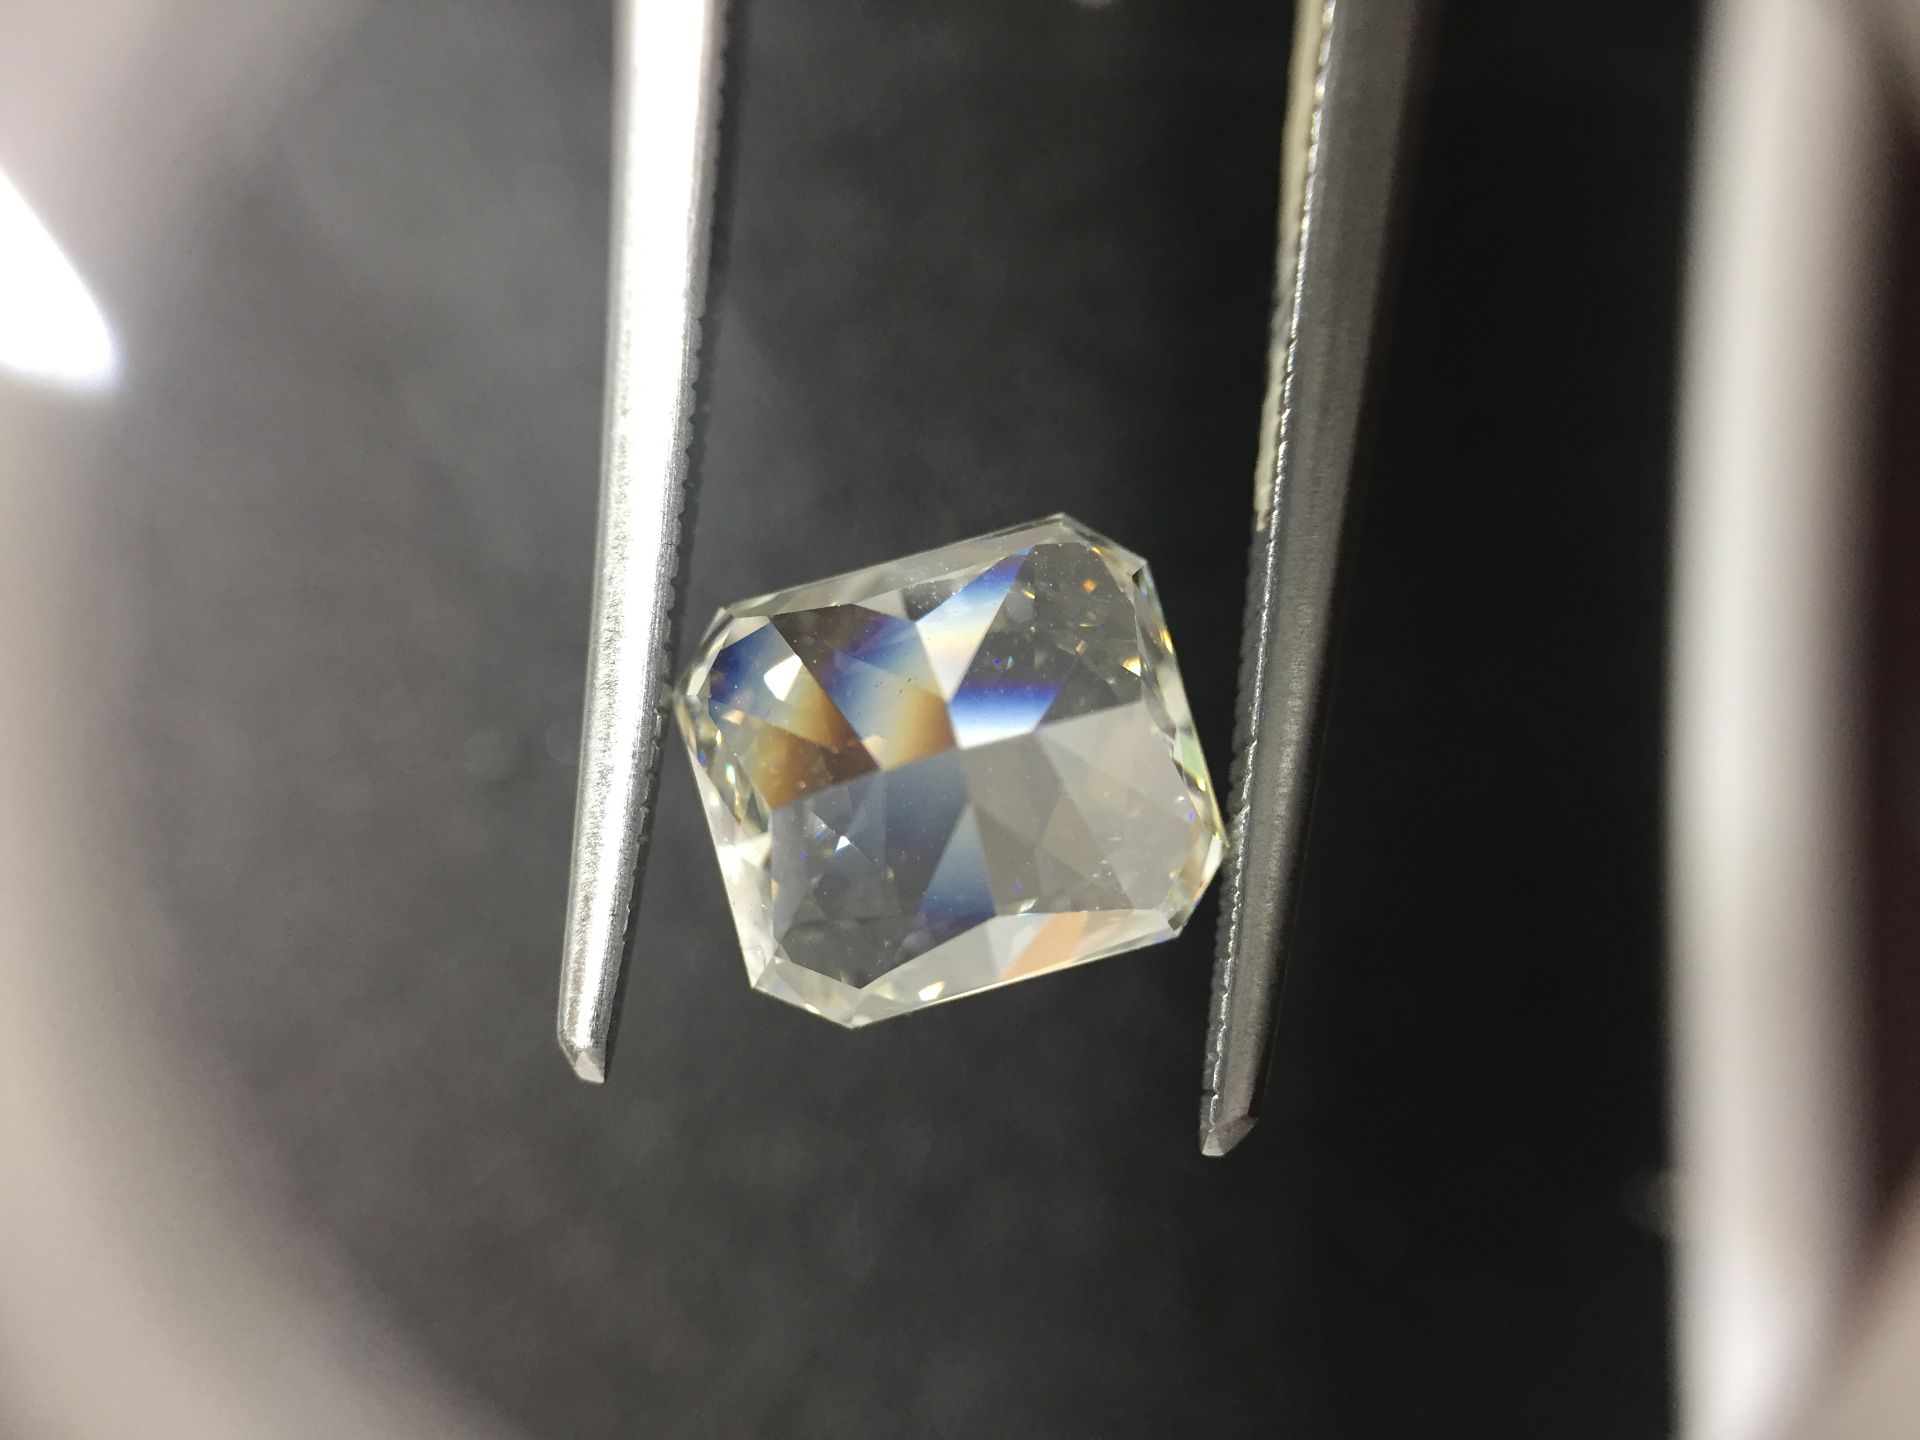 2.03ct radiant cut diamond. K colour, VS1 clarity. No certification. Valued at £17355 - Image 2 of 3